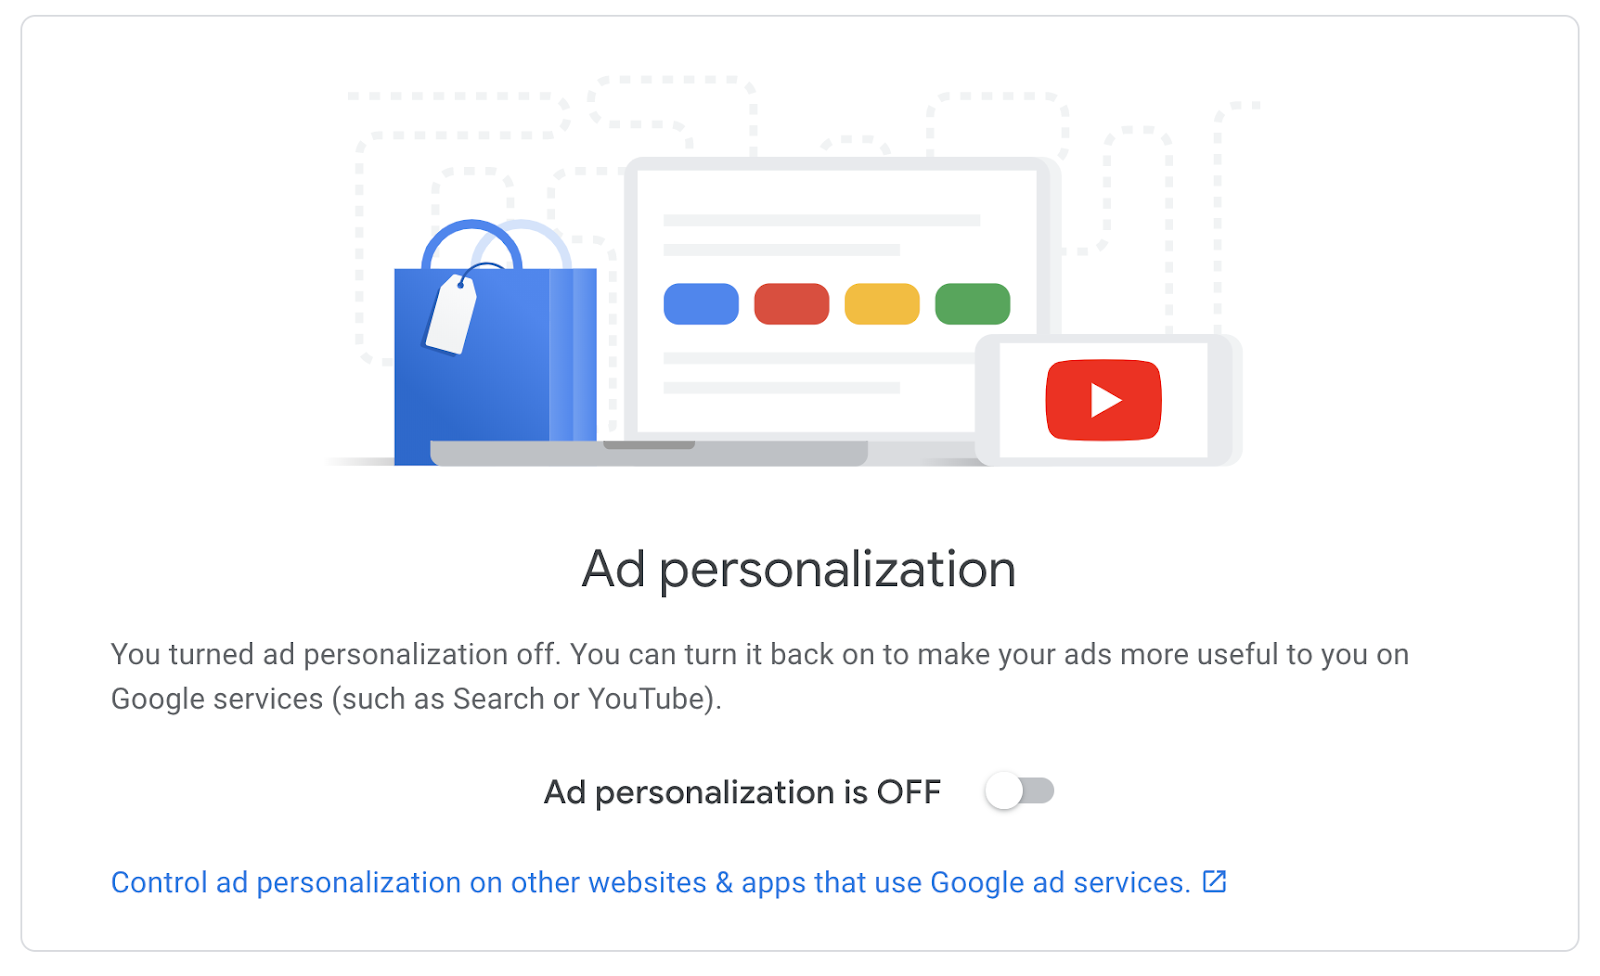 The Google ad personalization switch turned off